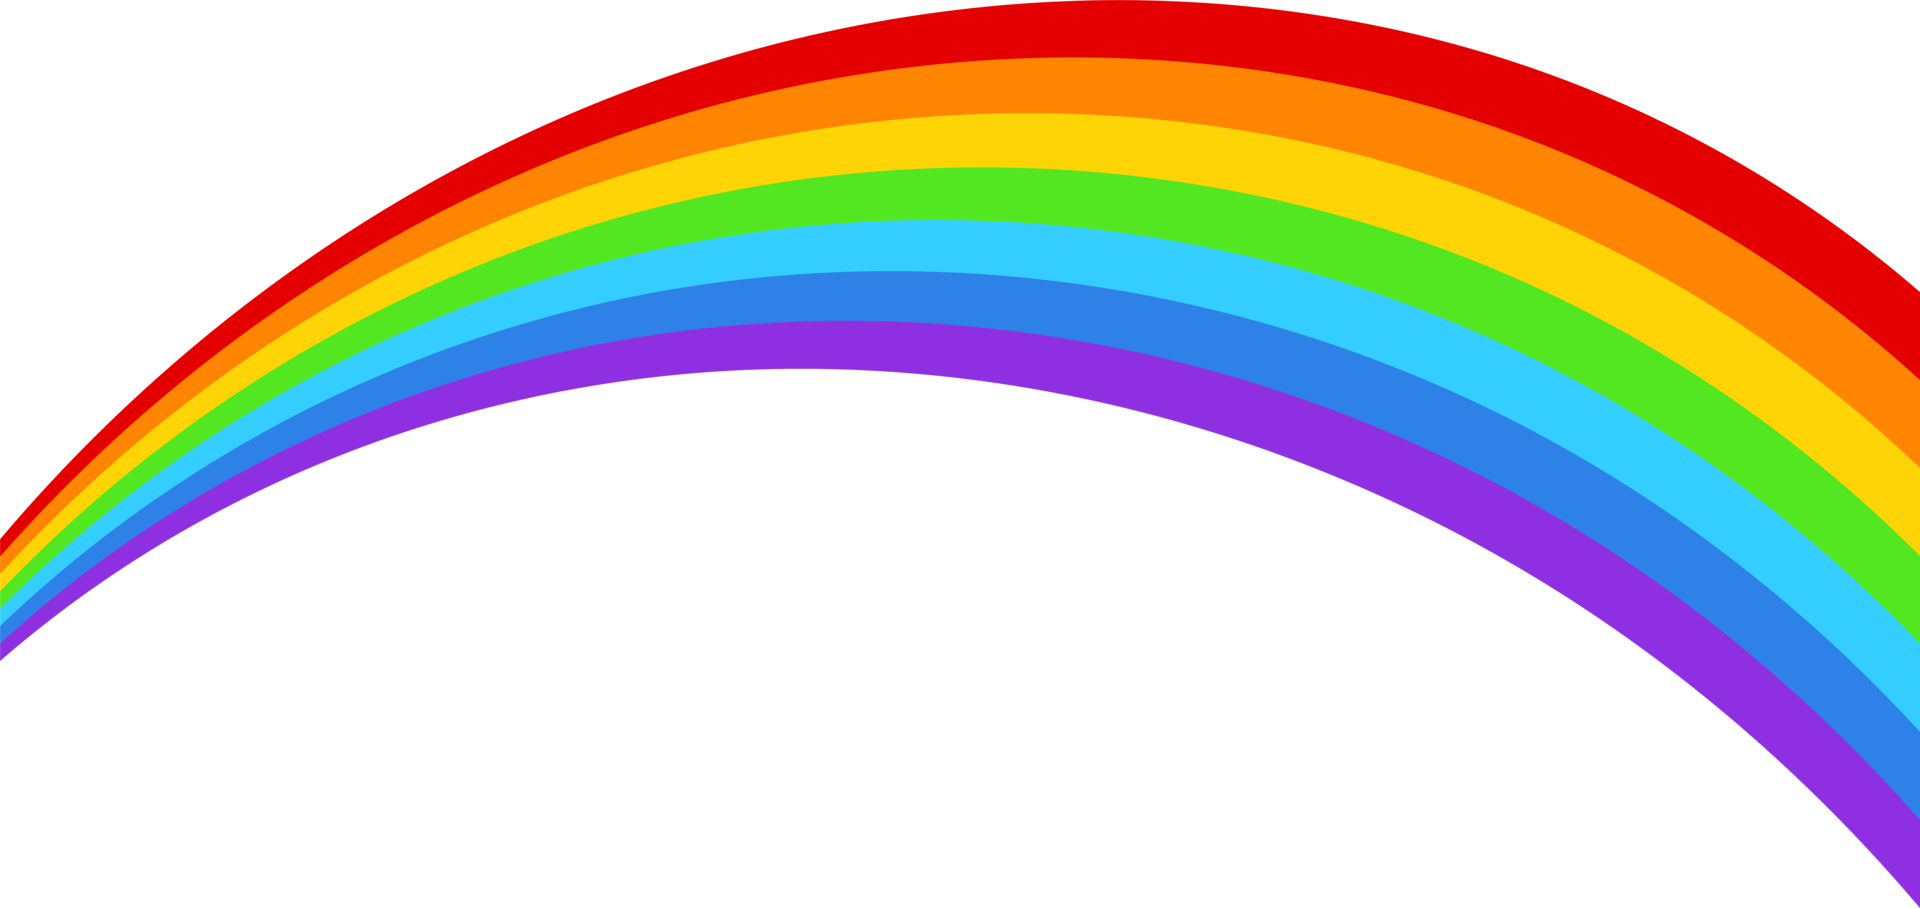 Rainbow Cartoon PNG Free Images with Transparent Background - (1,220 Free  Downloads)